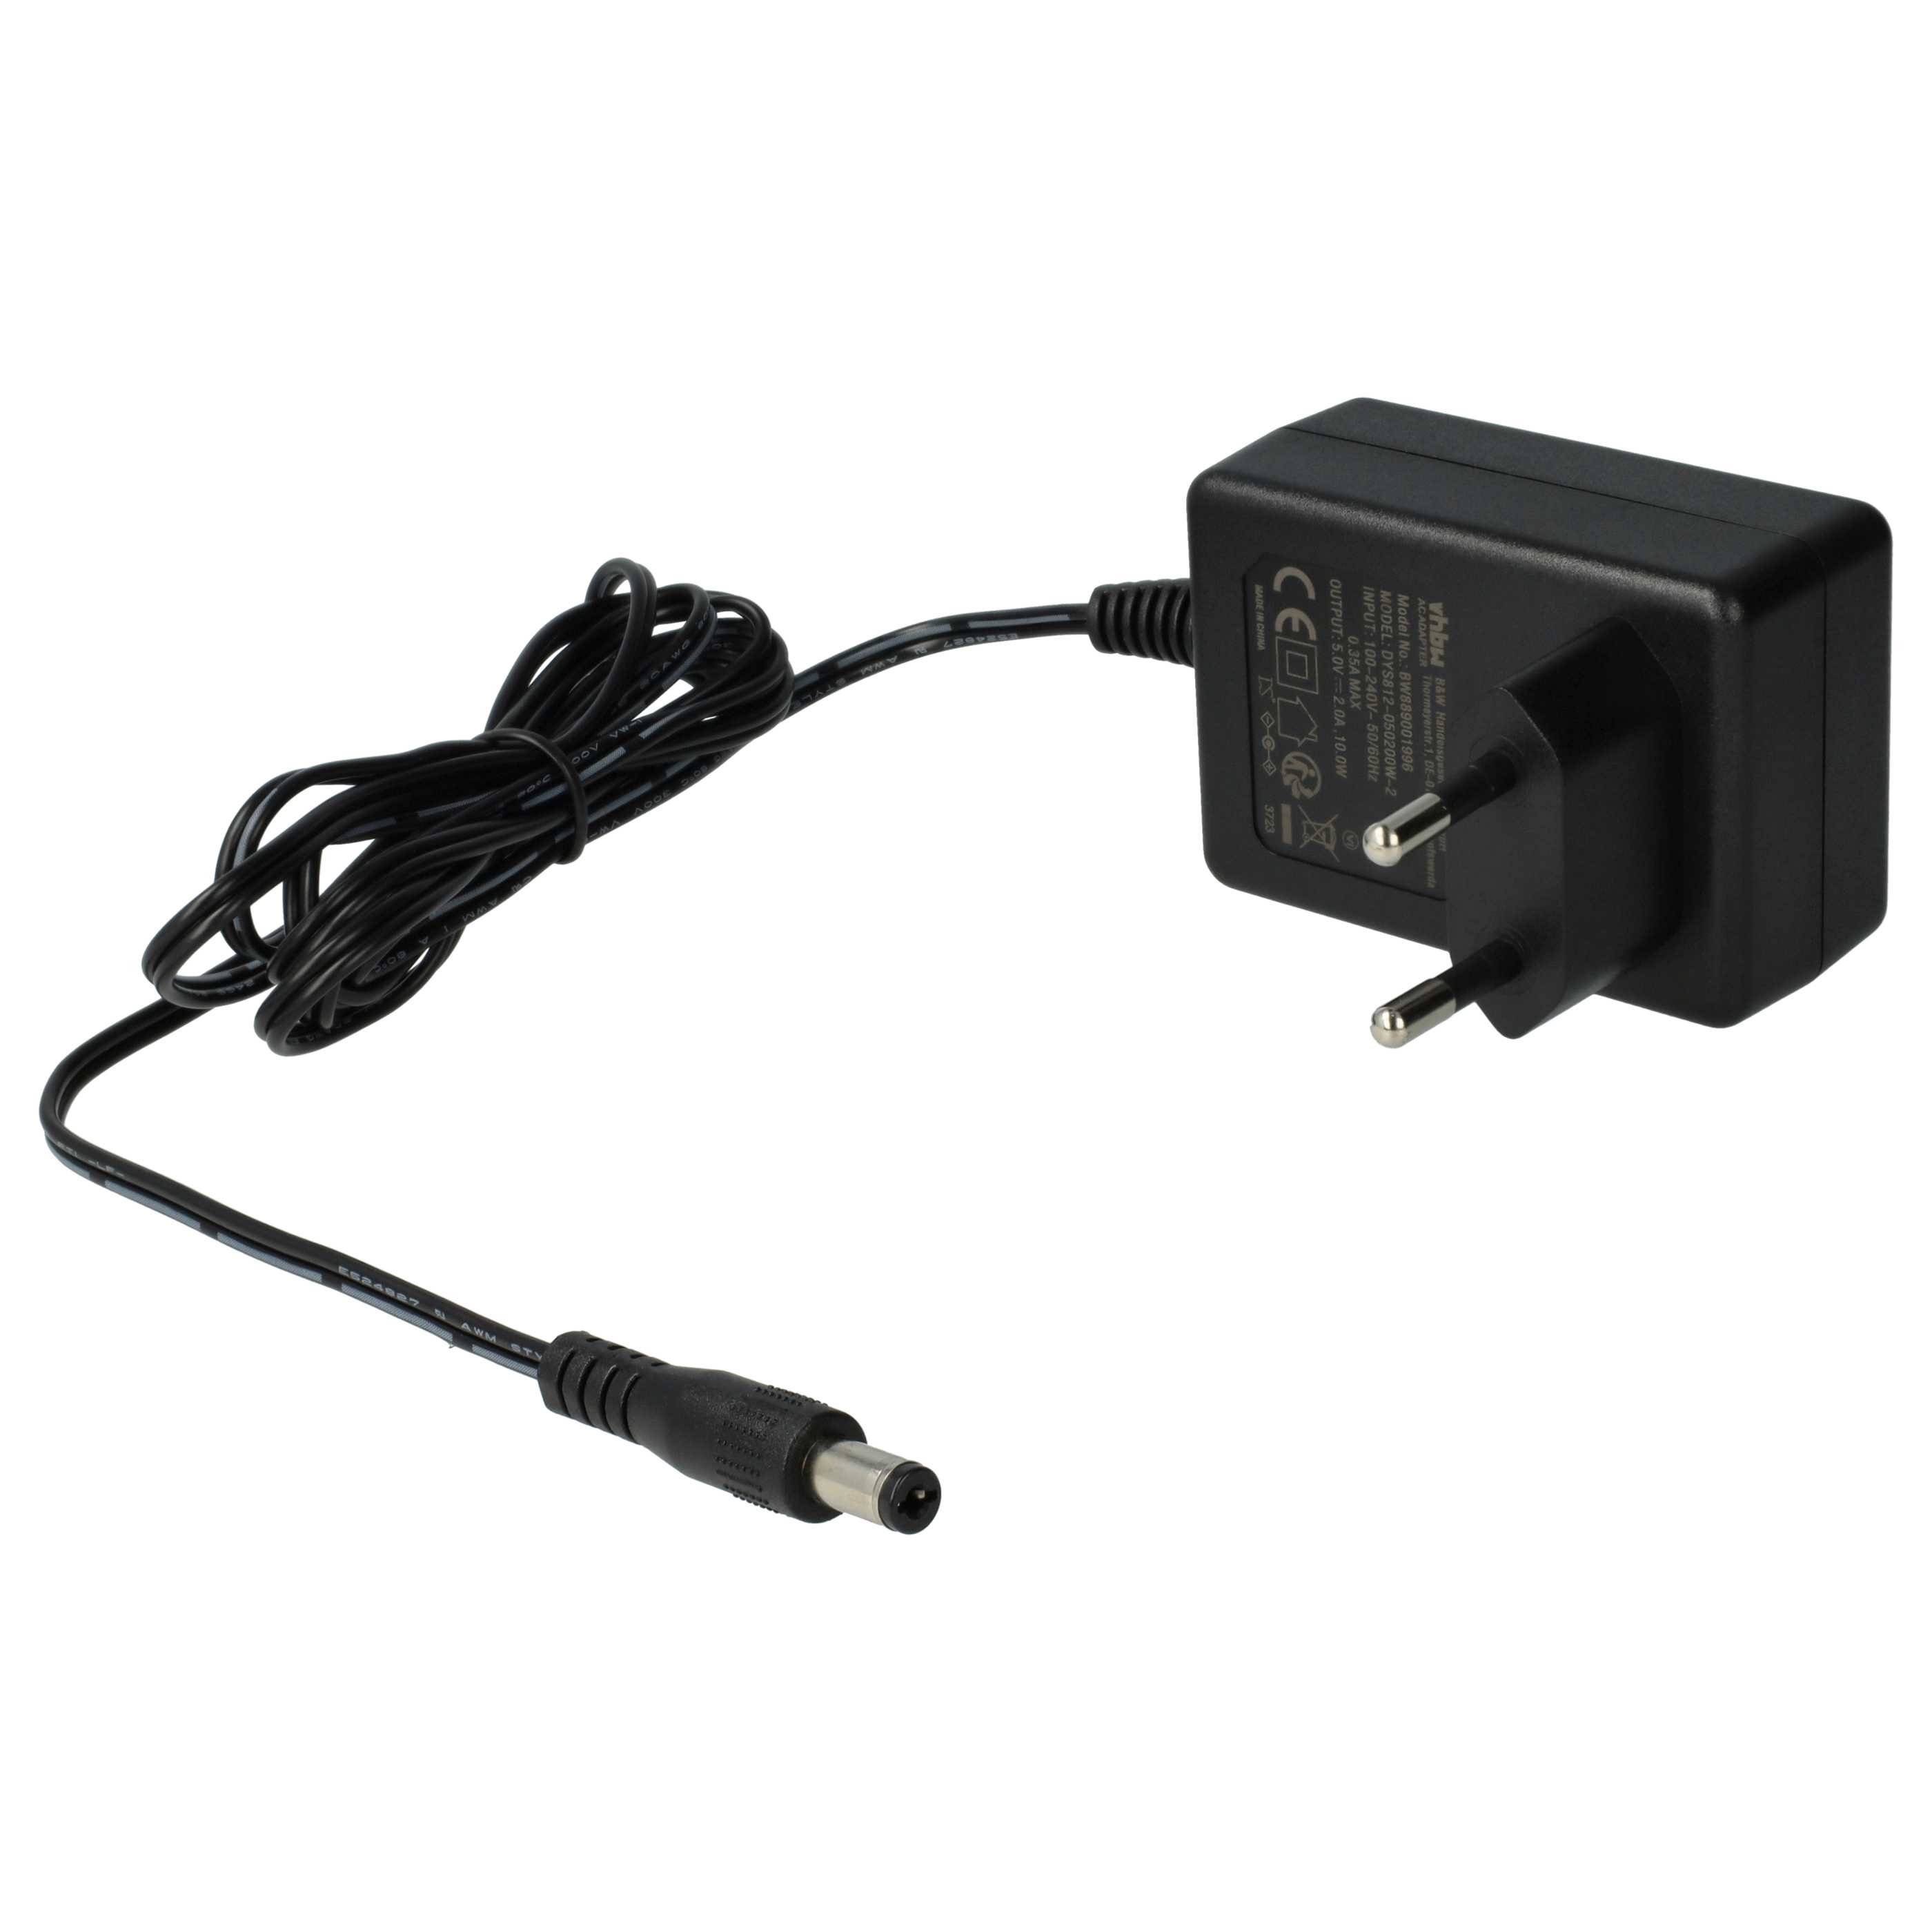 Mains Power Adapter replaces Fanvil PSU-520 for Yealink Landline Telephone, Home Telephone etc. - 150 cm